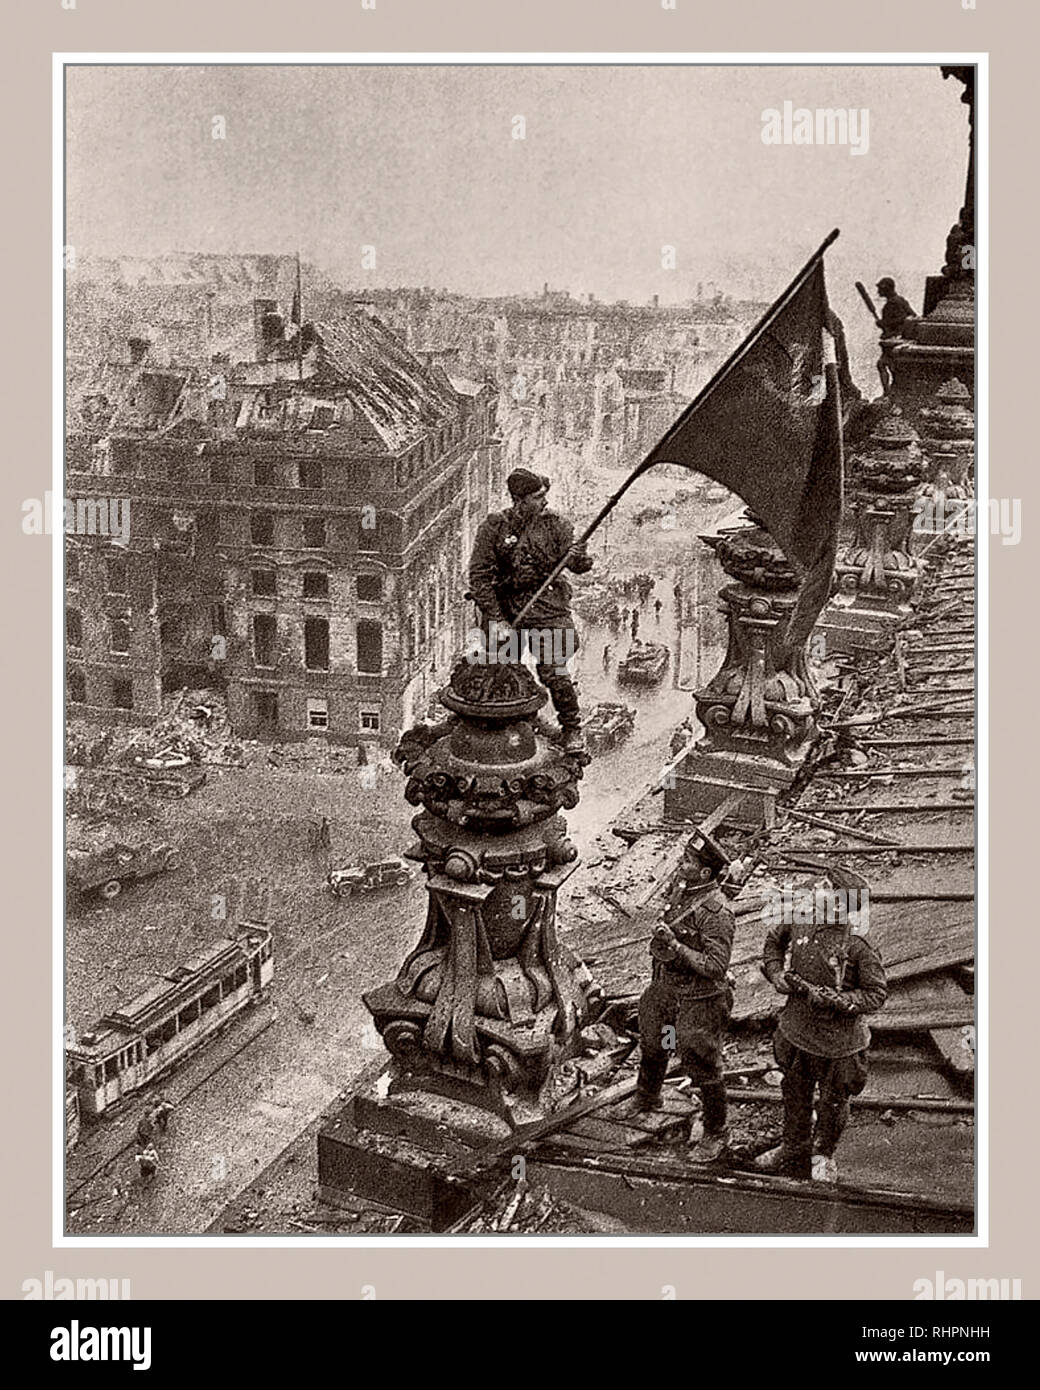 RUSSIAN FLAG BERLIN 1945 REICHSTAG ICONIC World War 2 Germany. Russian soldier raising Soviet Hammer and Sickle flag over the Nazi Reichstag Chancellory Russian Flag, a historic World War II photograph, taken during the Battle of Berlin on 2 May 1945. It shows Soviet Union Troops Meliton Kantaria and Mikhail Yegorov raising their flag over the former Nazi seat of power, the Berlin Reichstag Berlin Germany Stock Photo